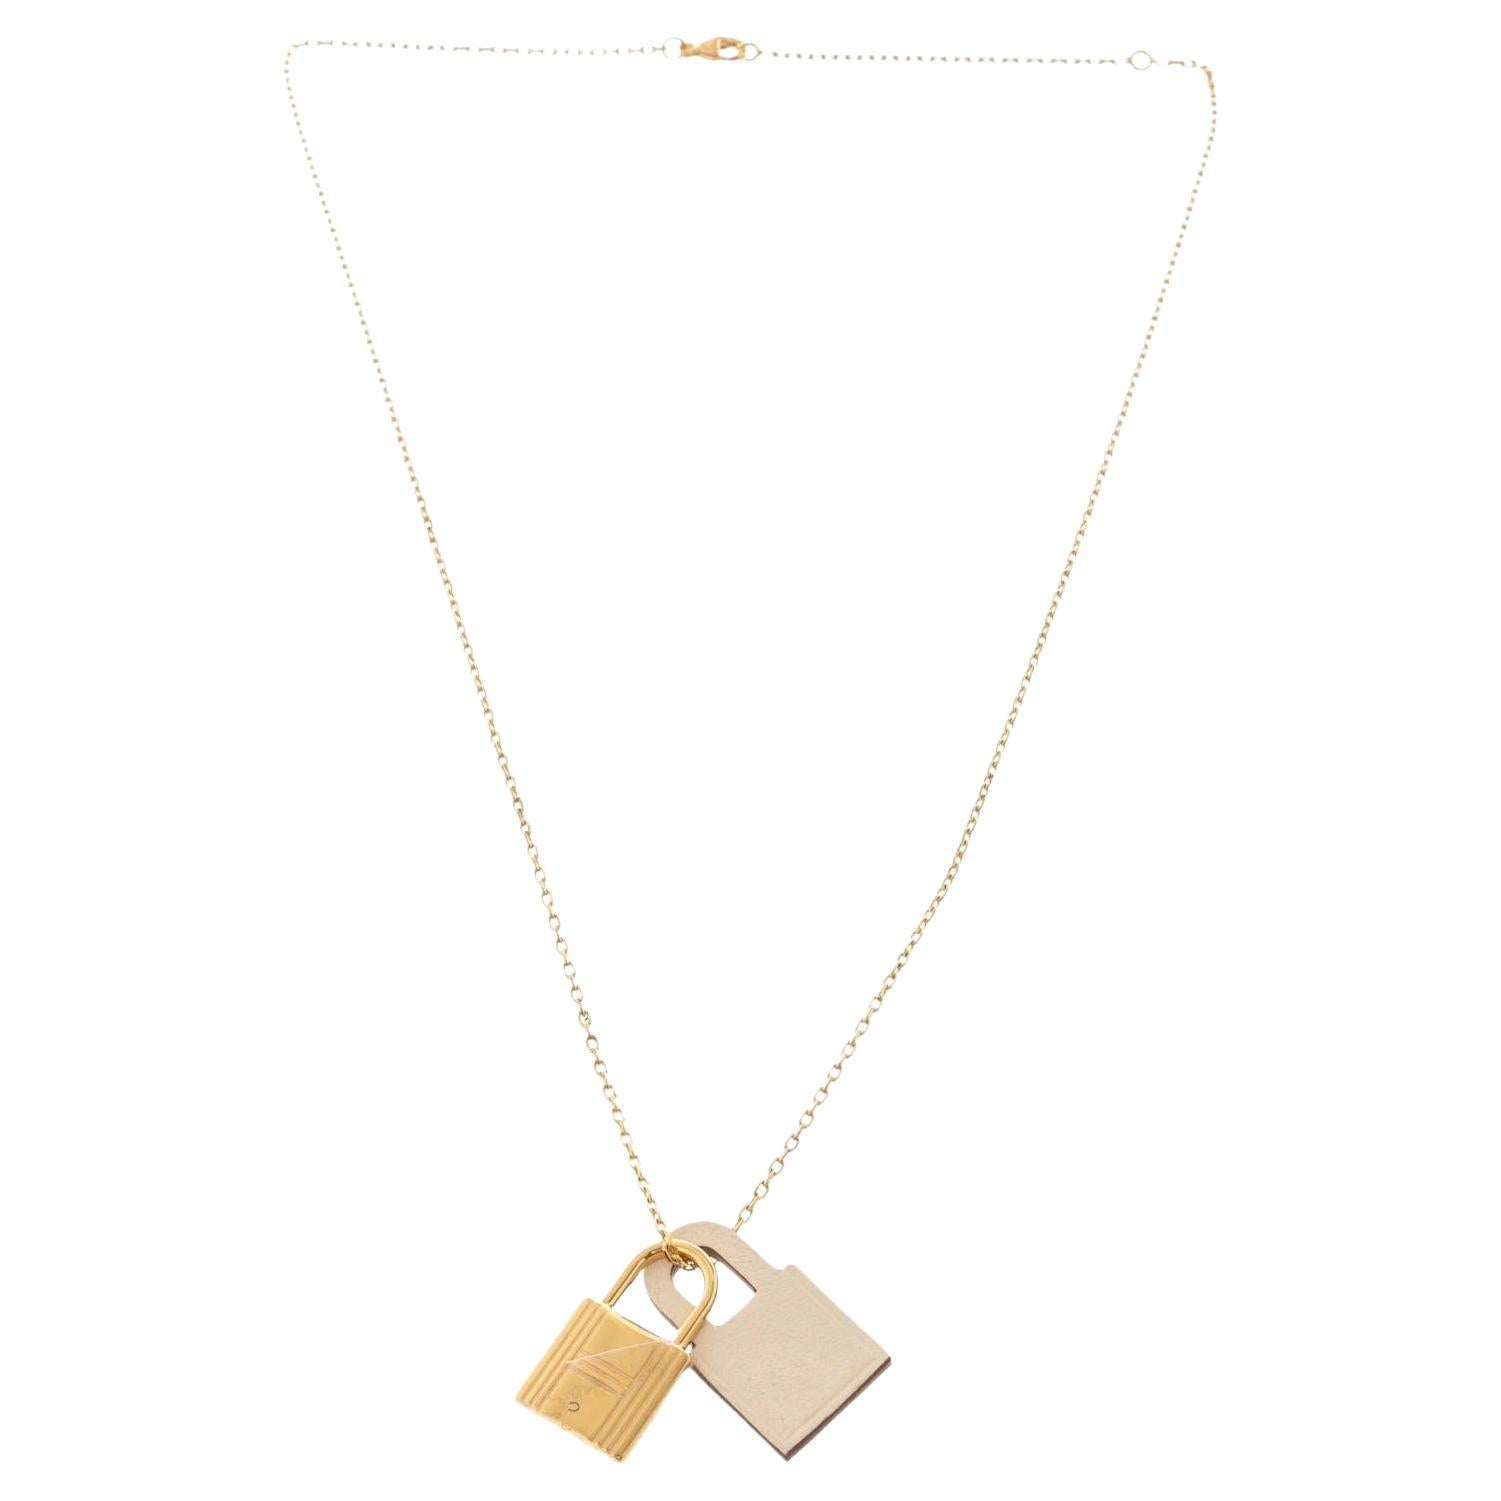 Hermes Long Necklace with Pendant in Swift with Gold-Plated Hardware